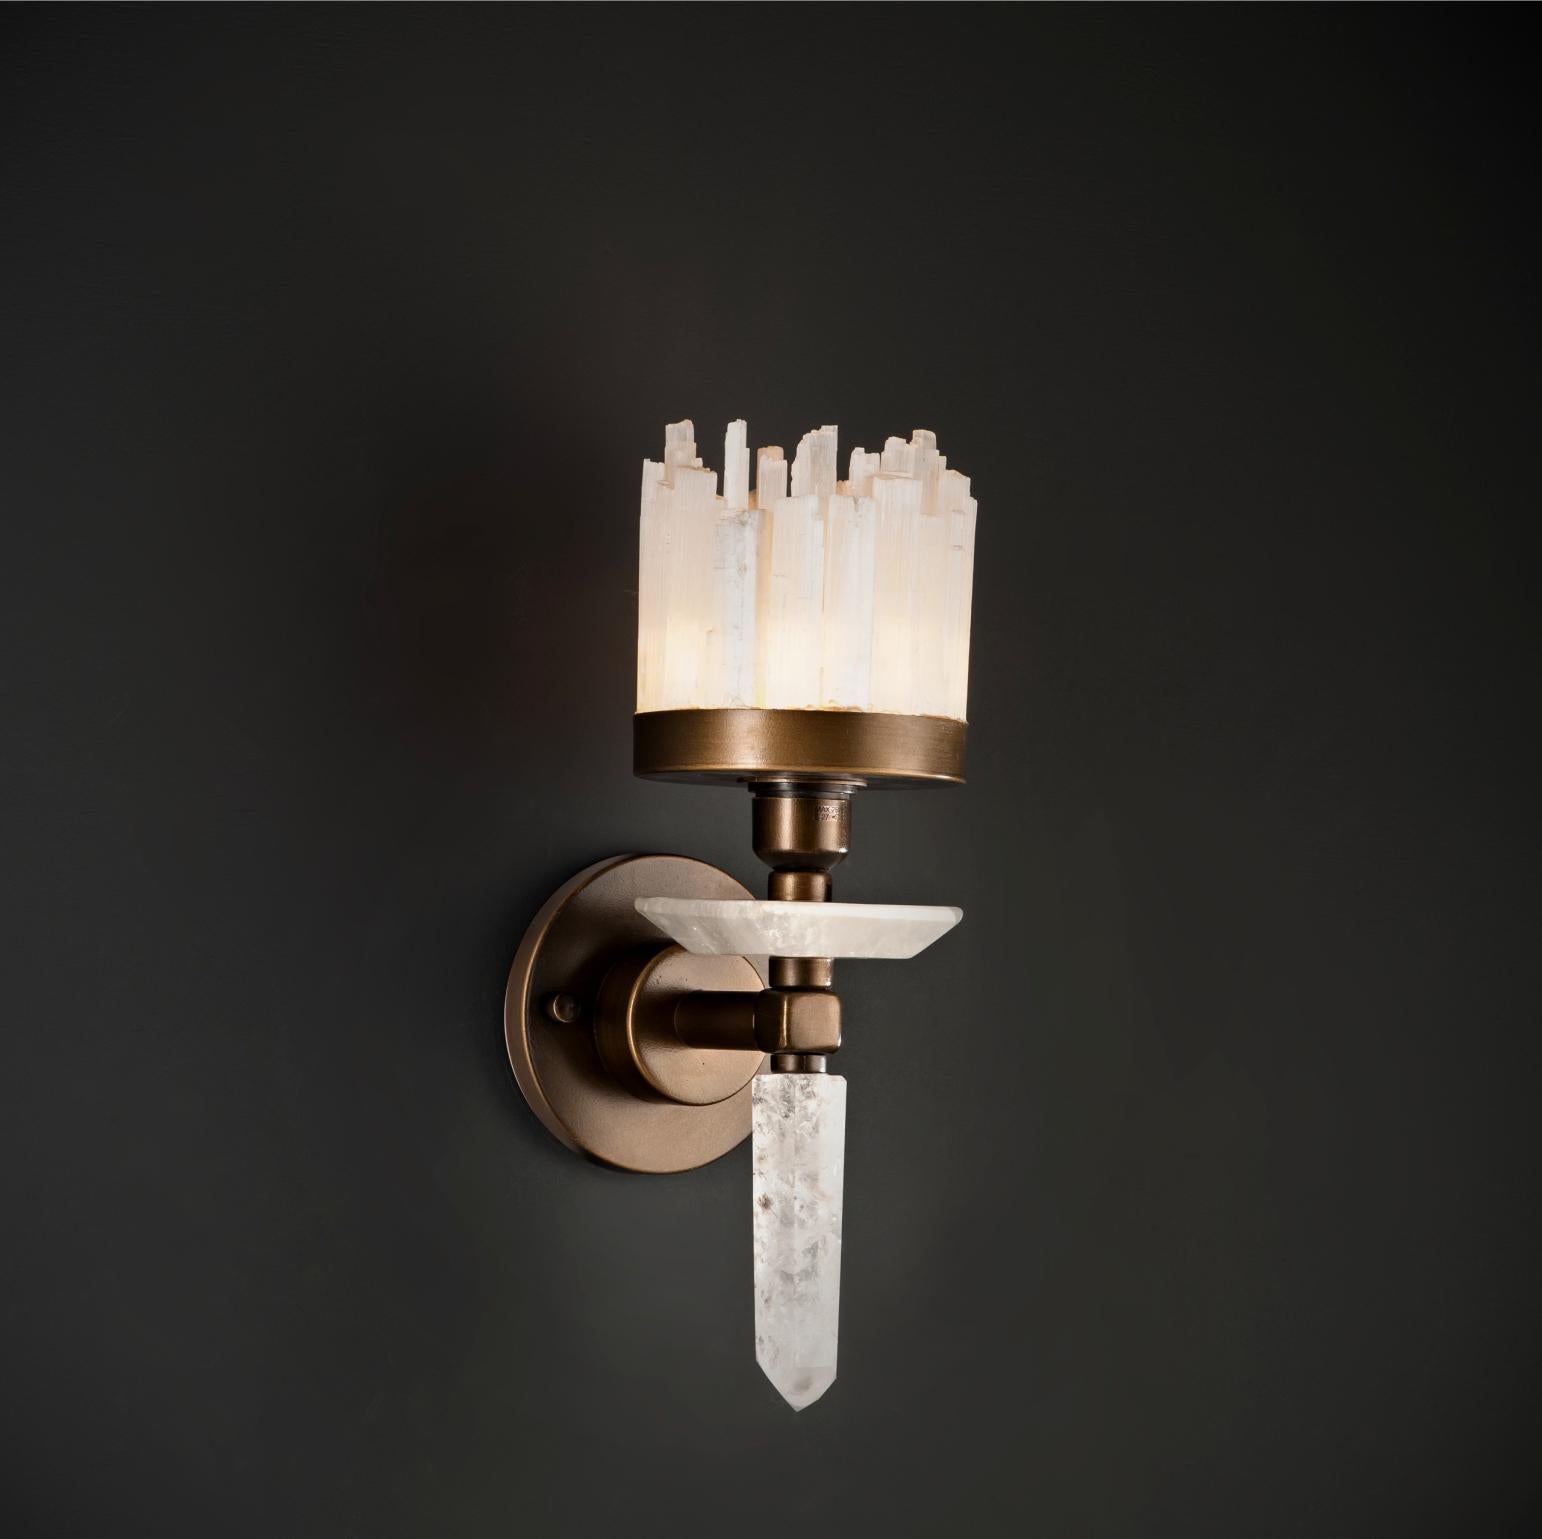 Quartz wall sconce by Aver 
Dimensions: D 12 x W 20 x H 35 cm 
Materials: Aluminum, plated. Natural Selenite. 
Lighting: 01 x E-27 LED.
Finish: Silver Veneer, Aged Silver Veneer, Gold Veneer, Aged Gold Veneer, Copper Veneer, Aged Copper Veneer, Aged